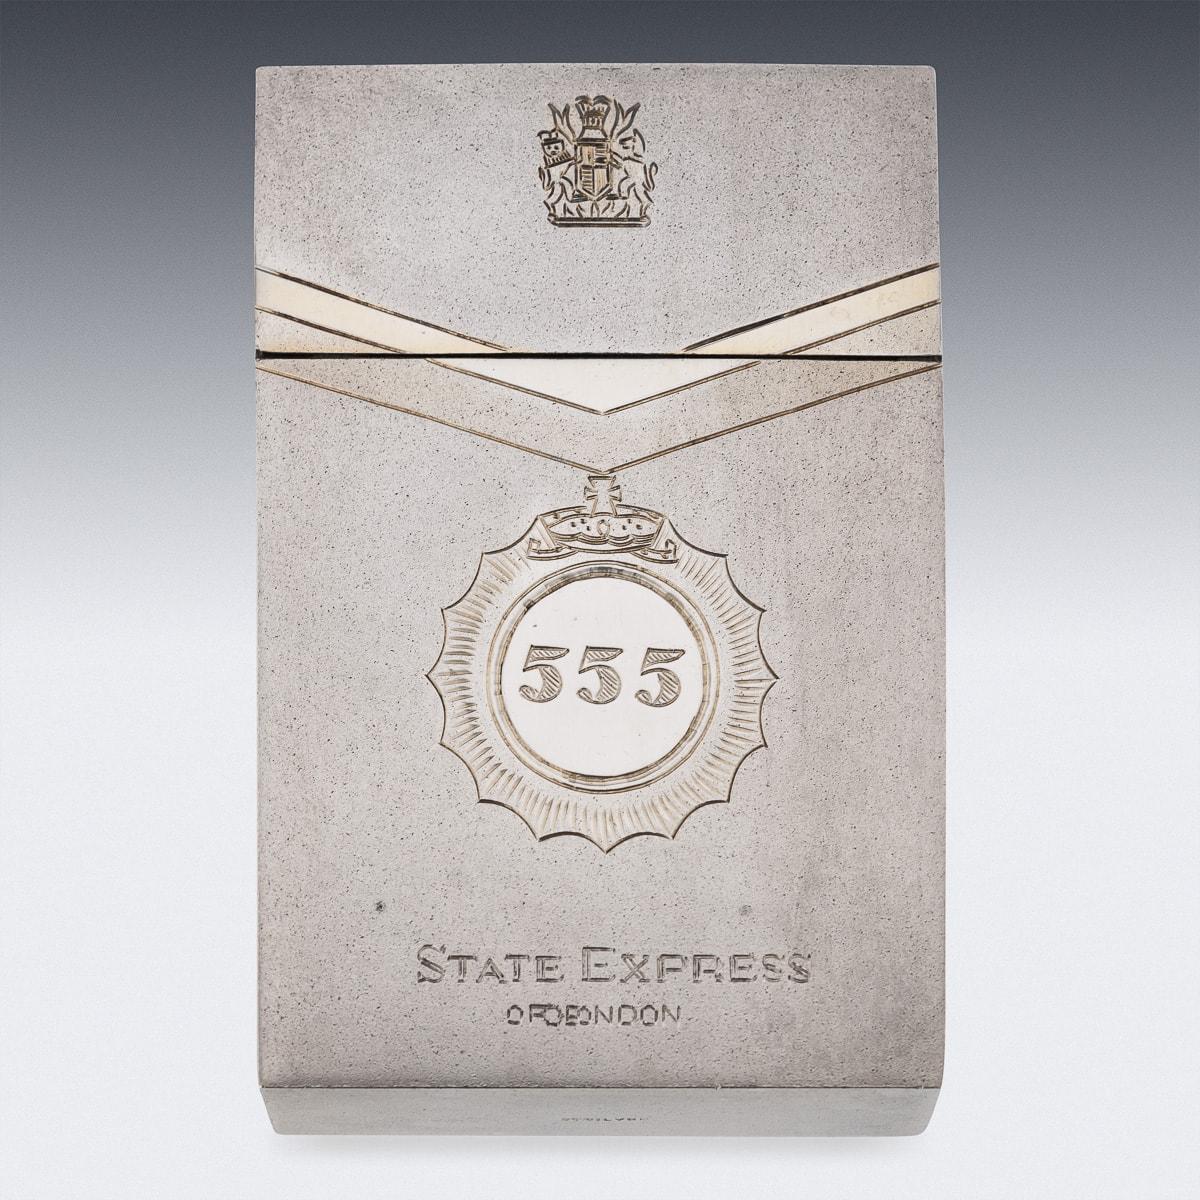 A superb 20th Century solid silver cigarette box by 555 State Express of London. The box is in the style of a cigarette carton, the ingraved decoration on the front of the carton has the 555 State Express logo as well as a coat of arms on the flip